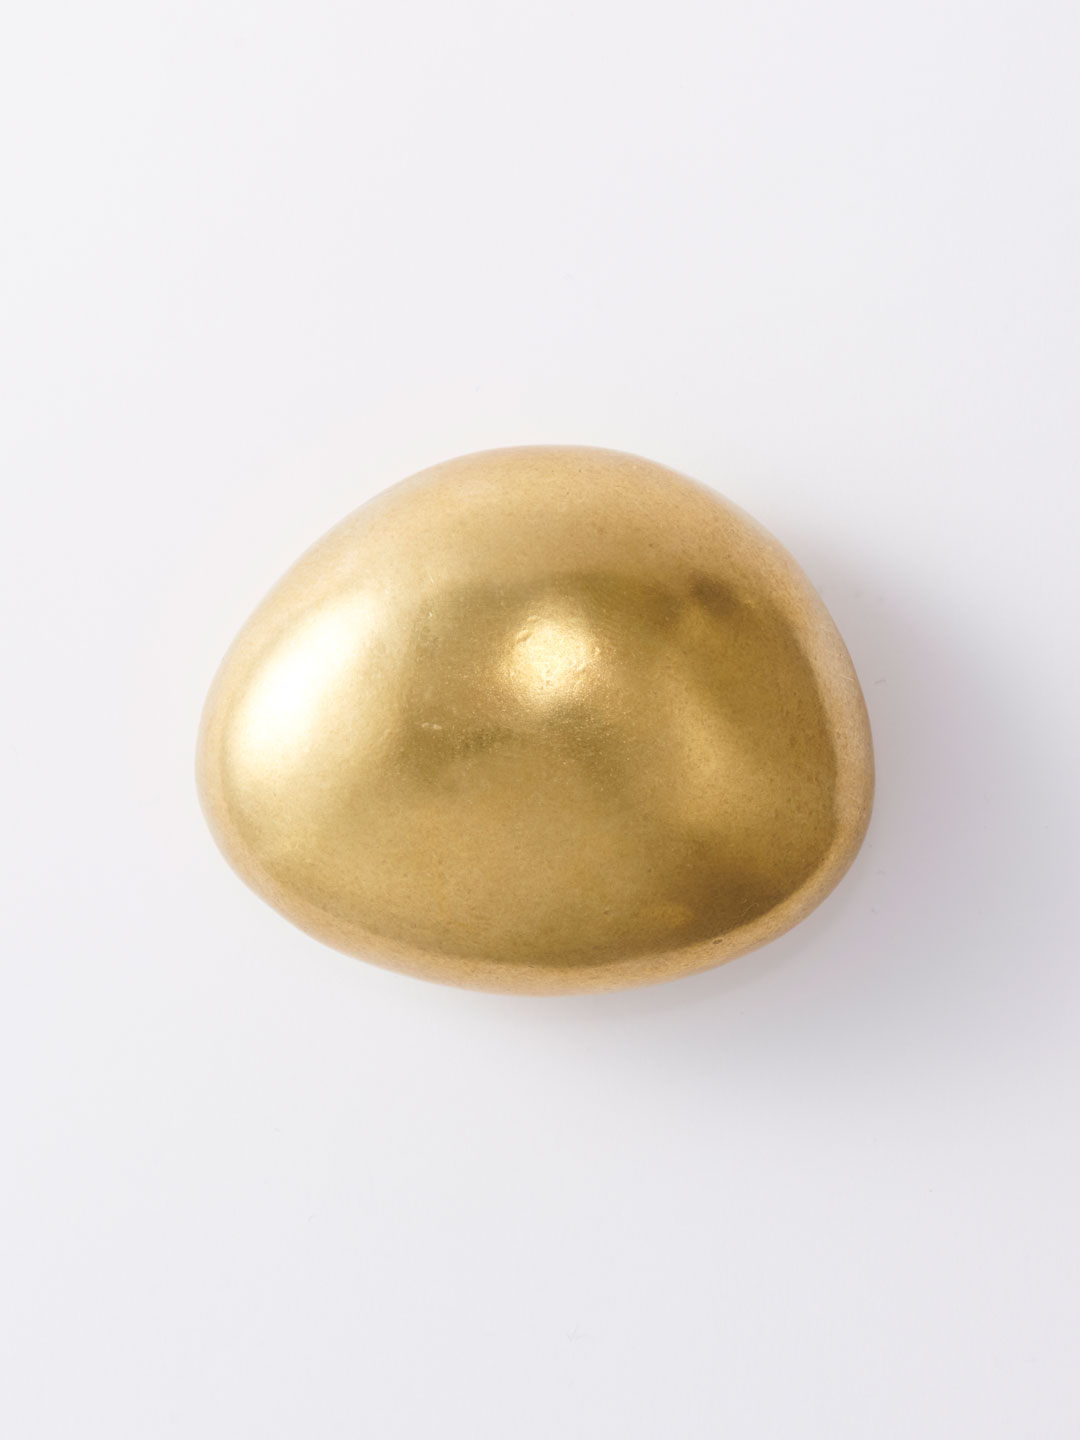 Paper Weight 002 - Gold